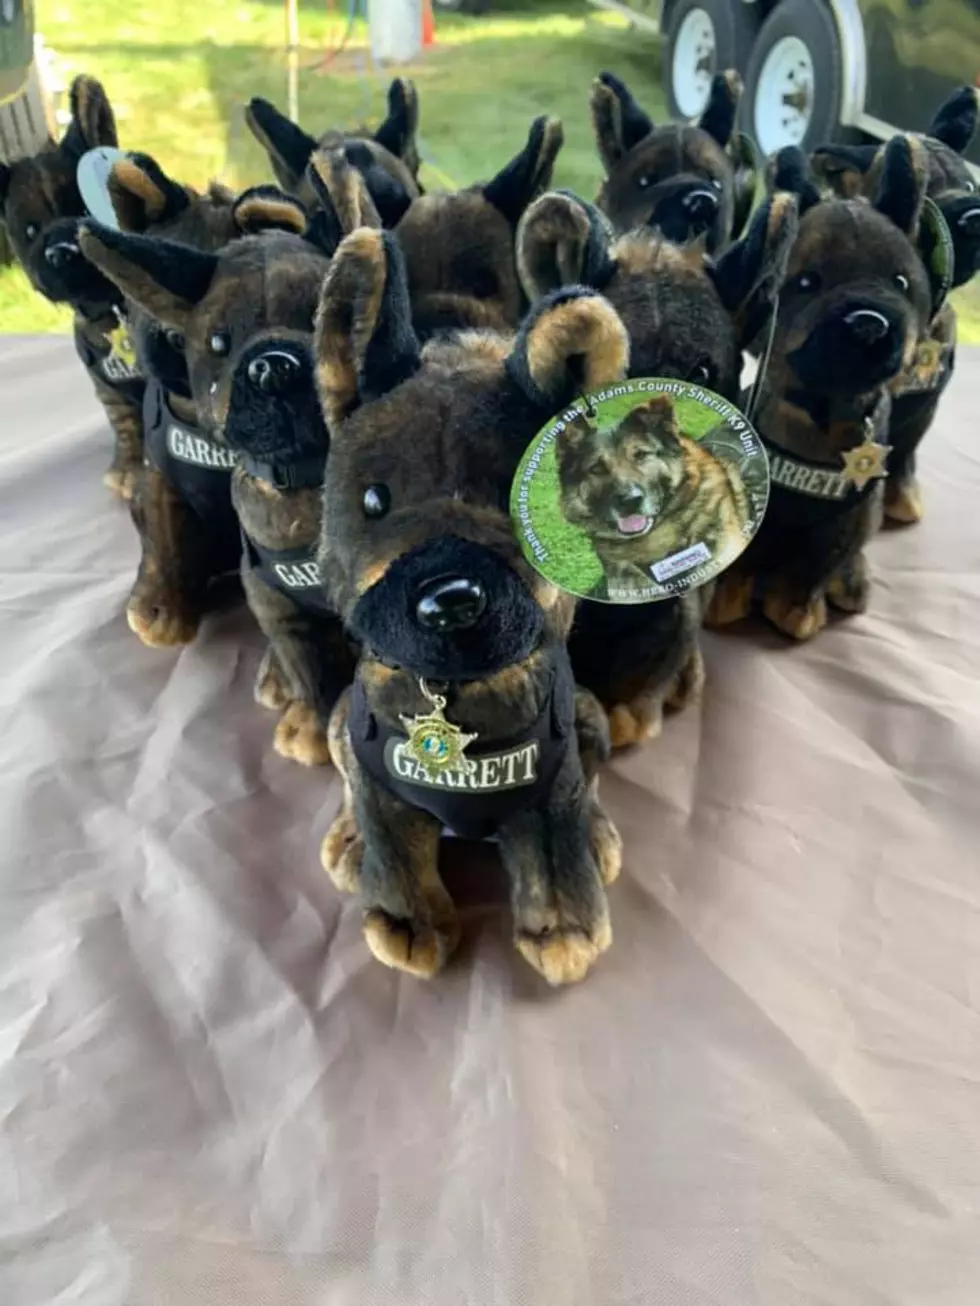 Adams County Selling Adorable ‘Pups’ to Help K-9 Program